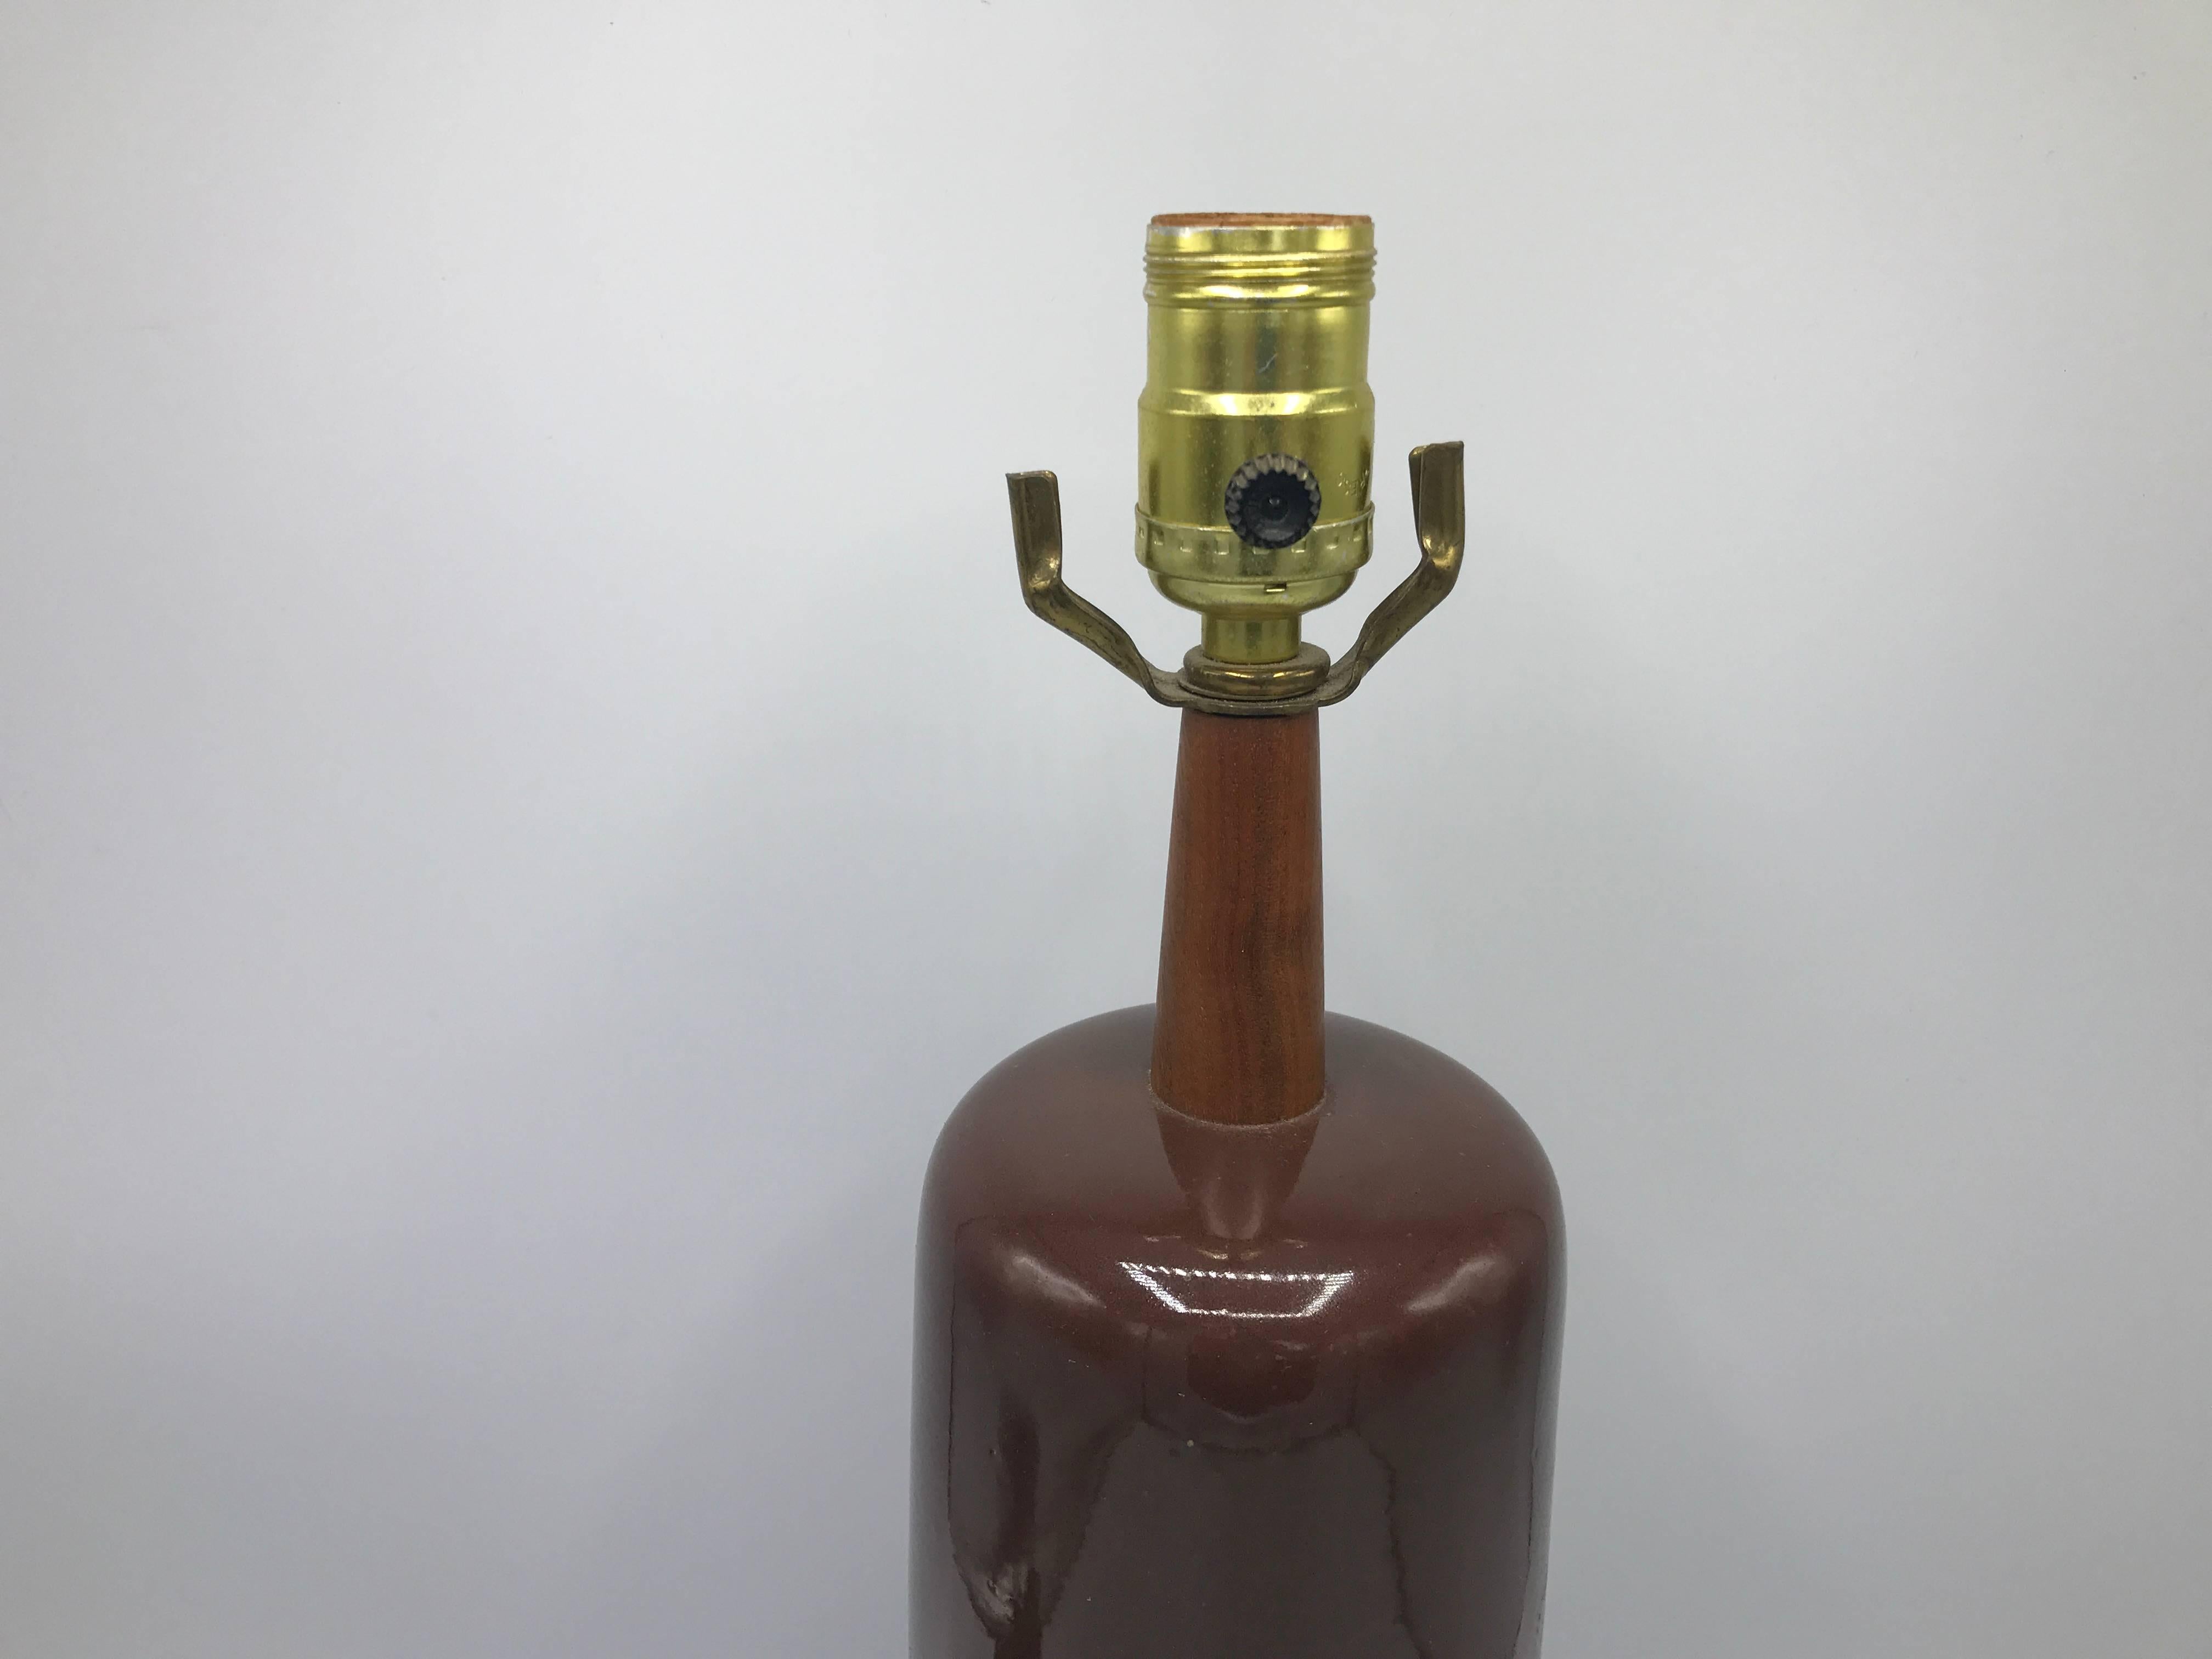 Offered is a stunning, 1960s Martz brown glazed ceramic lamp with teak accent. Signed on backside.